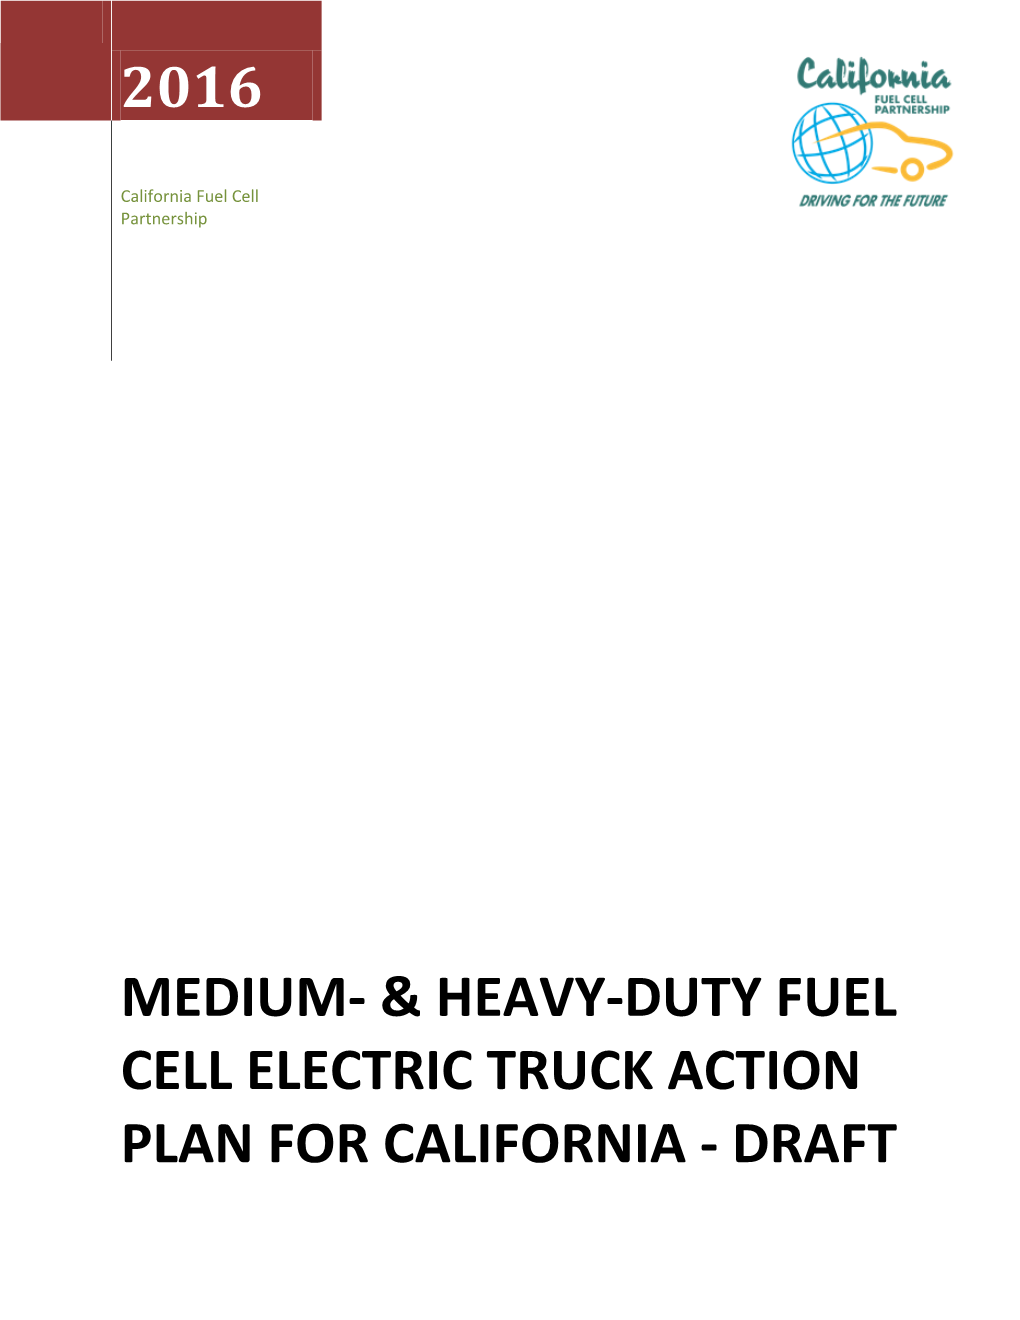 Medium- & Heavy-Duty Fuel Cell Electric Truck Action Plan for California